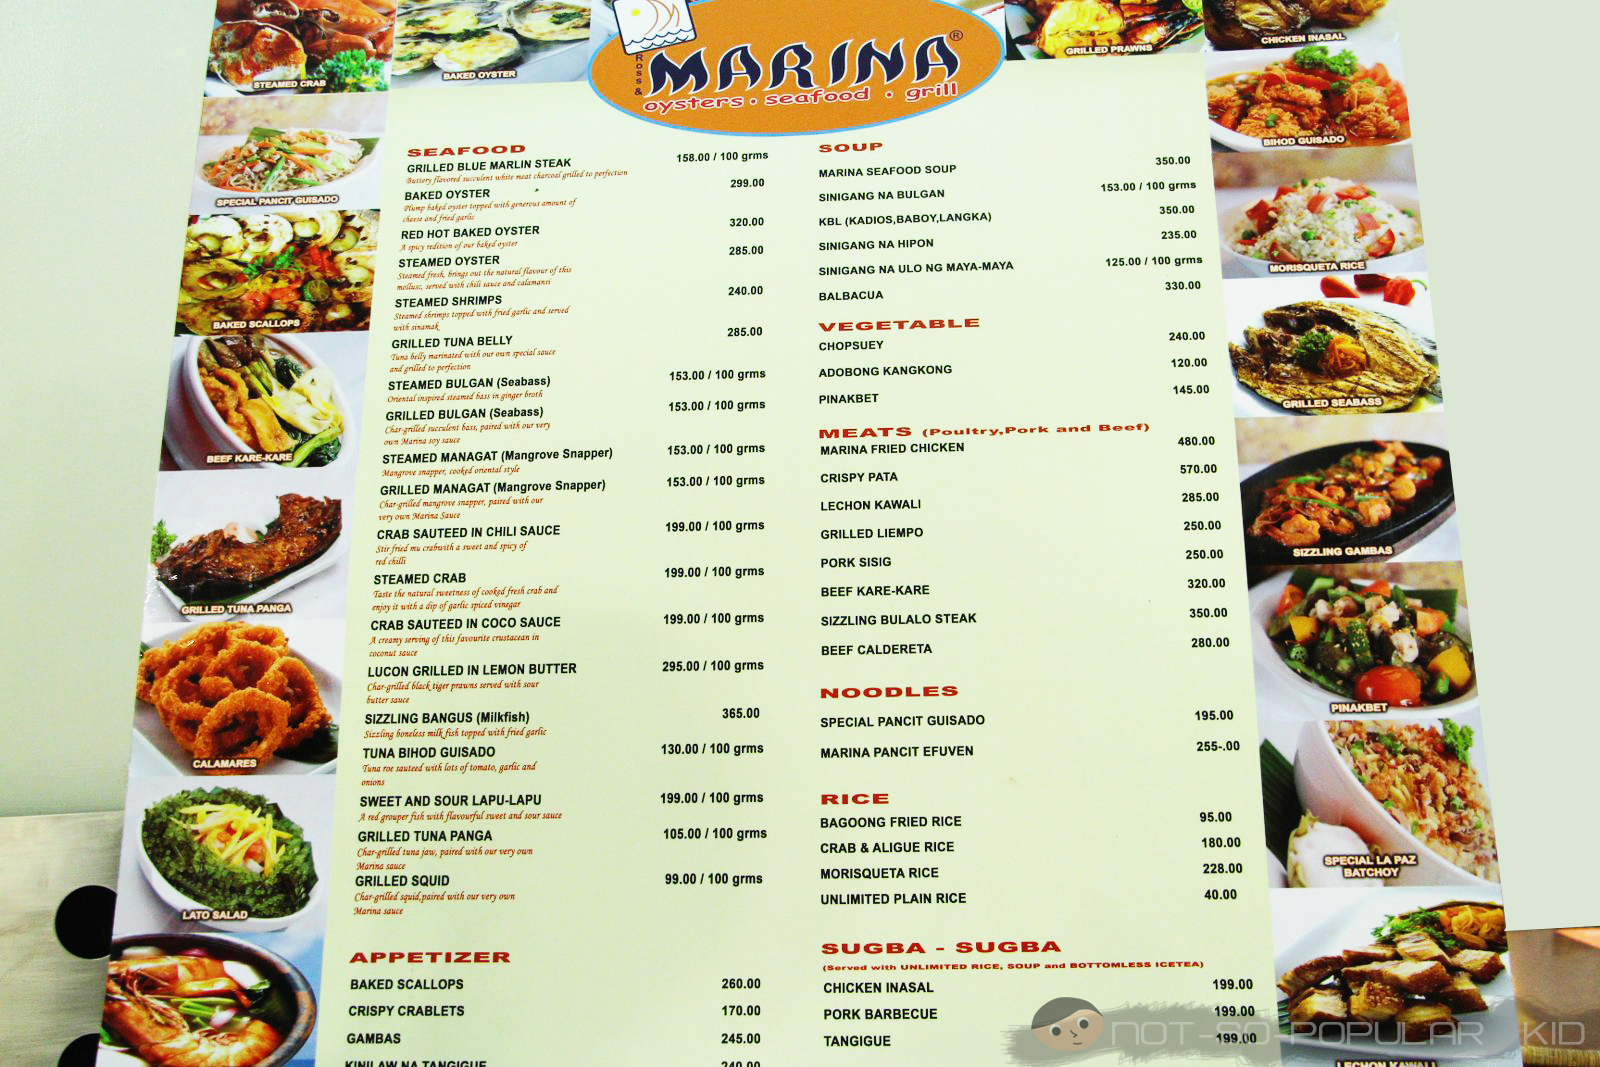 MARINA Seafood Restaurant in Robinson's Place Ermita - A Not-So-Popular